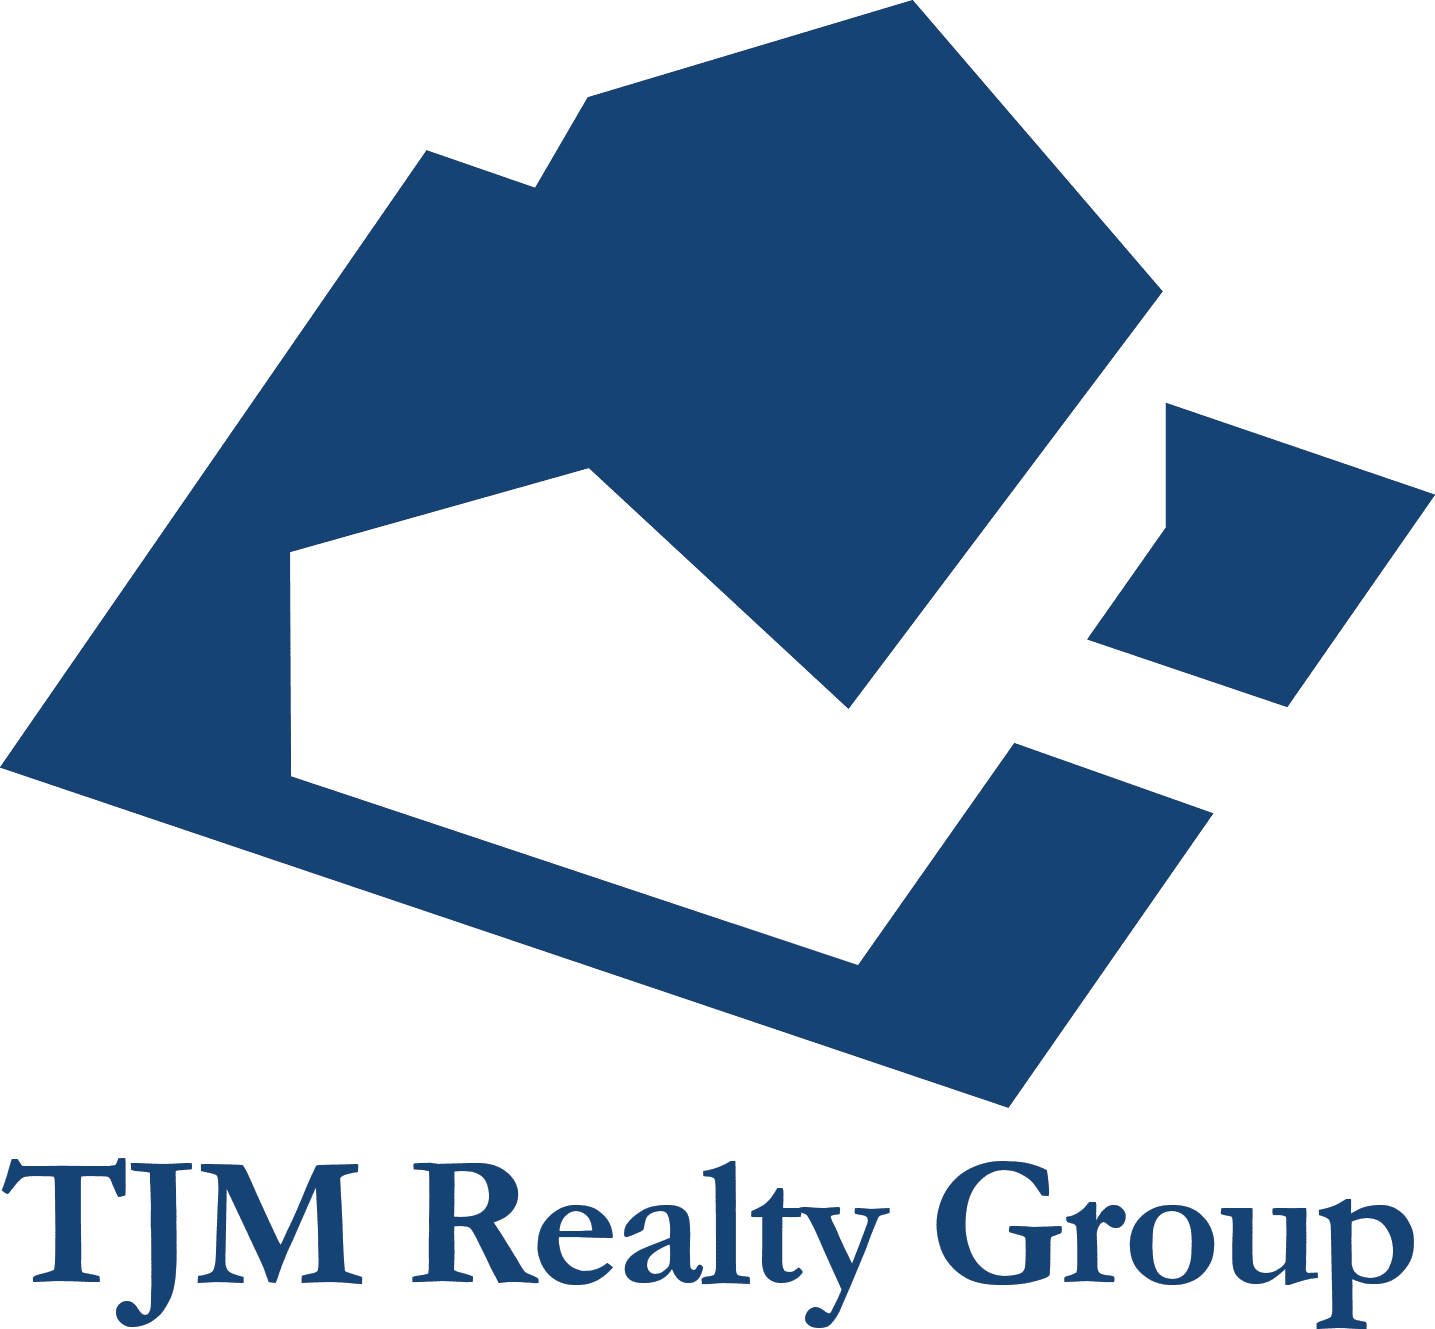 TJM Realty Group